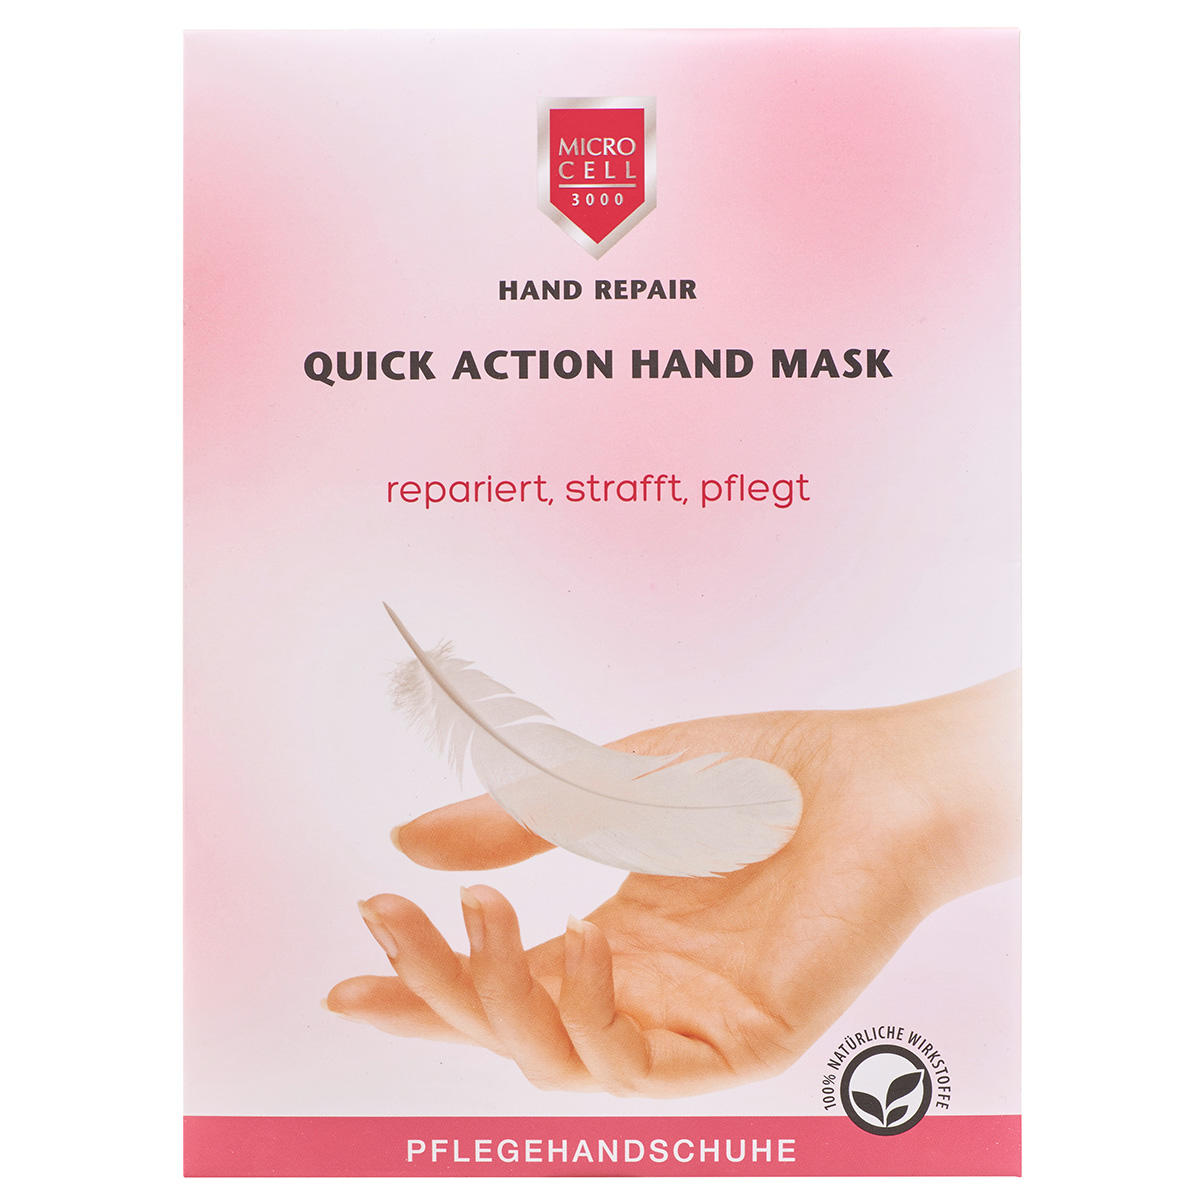 MICRO CELL QUICK ACTION ANTI AGING HAND MASK 1 Paar - 1